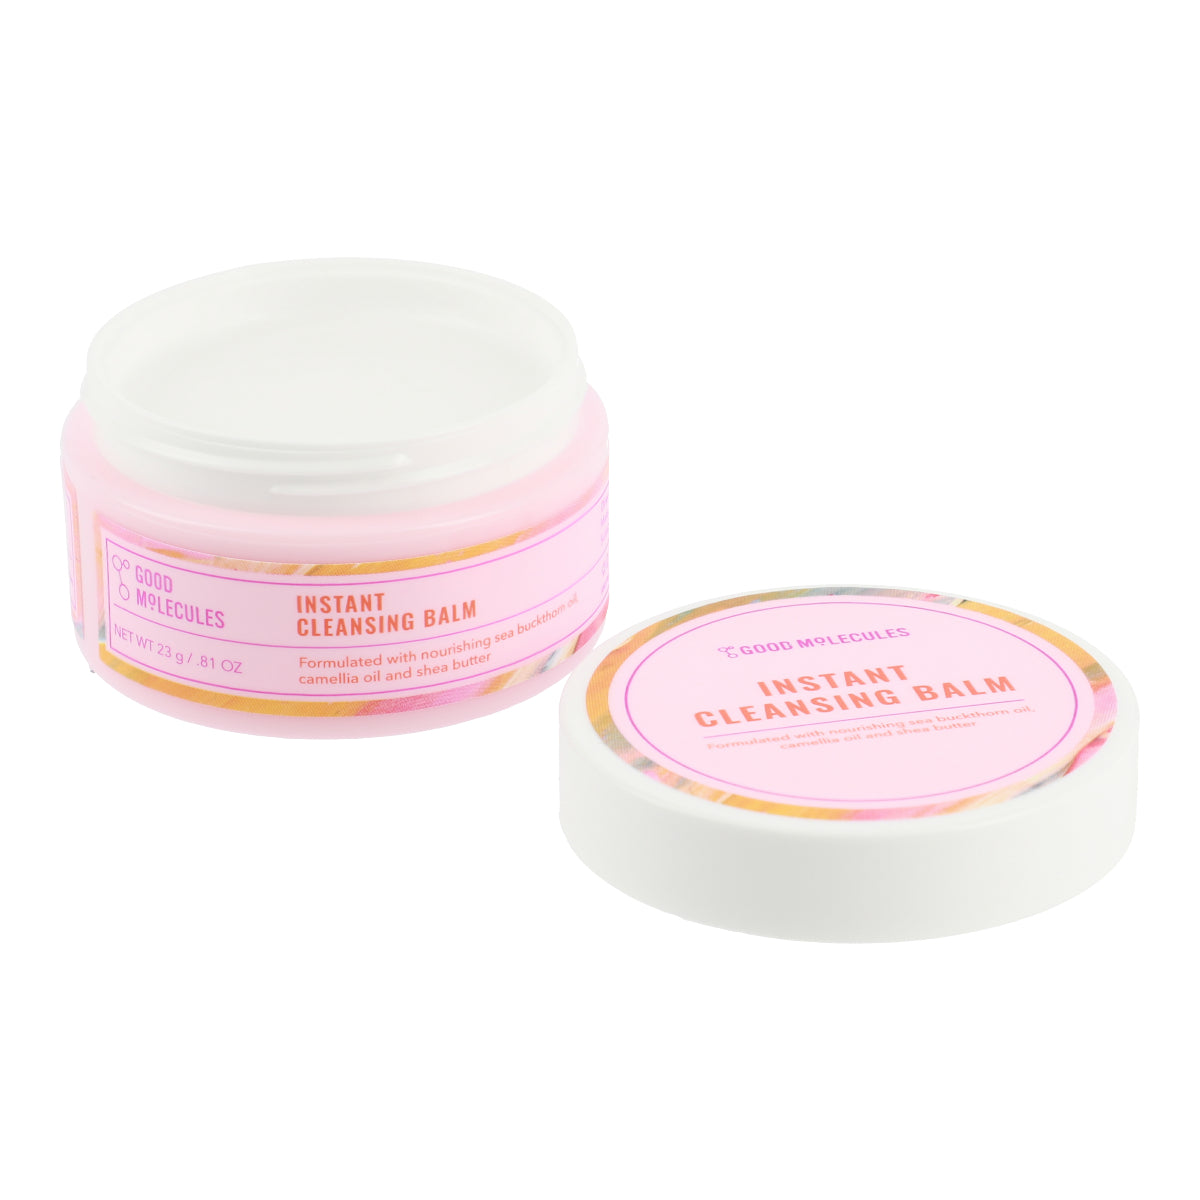 Instant Cleansing Balm - Travel Size 23g